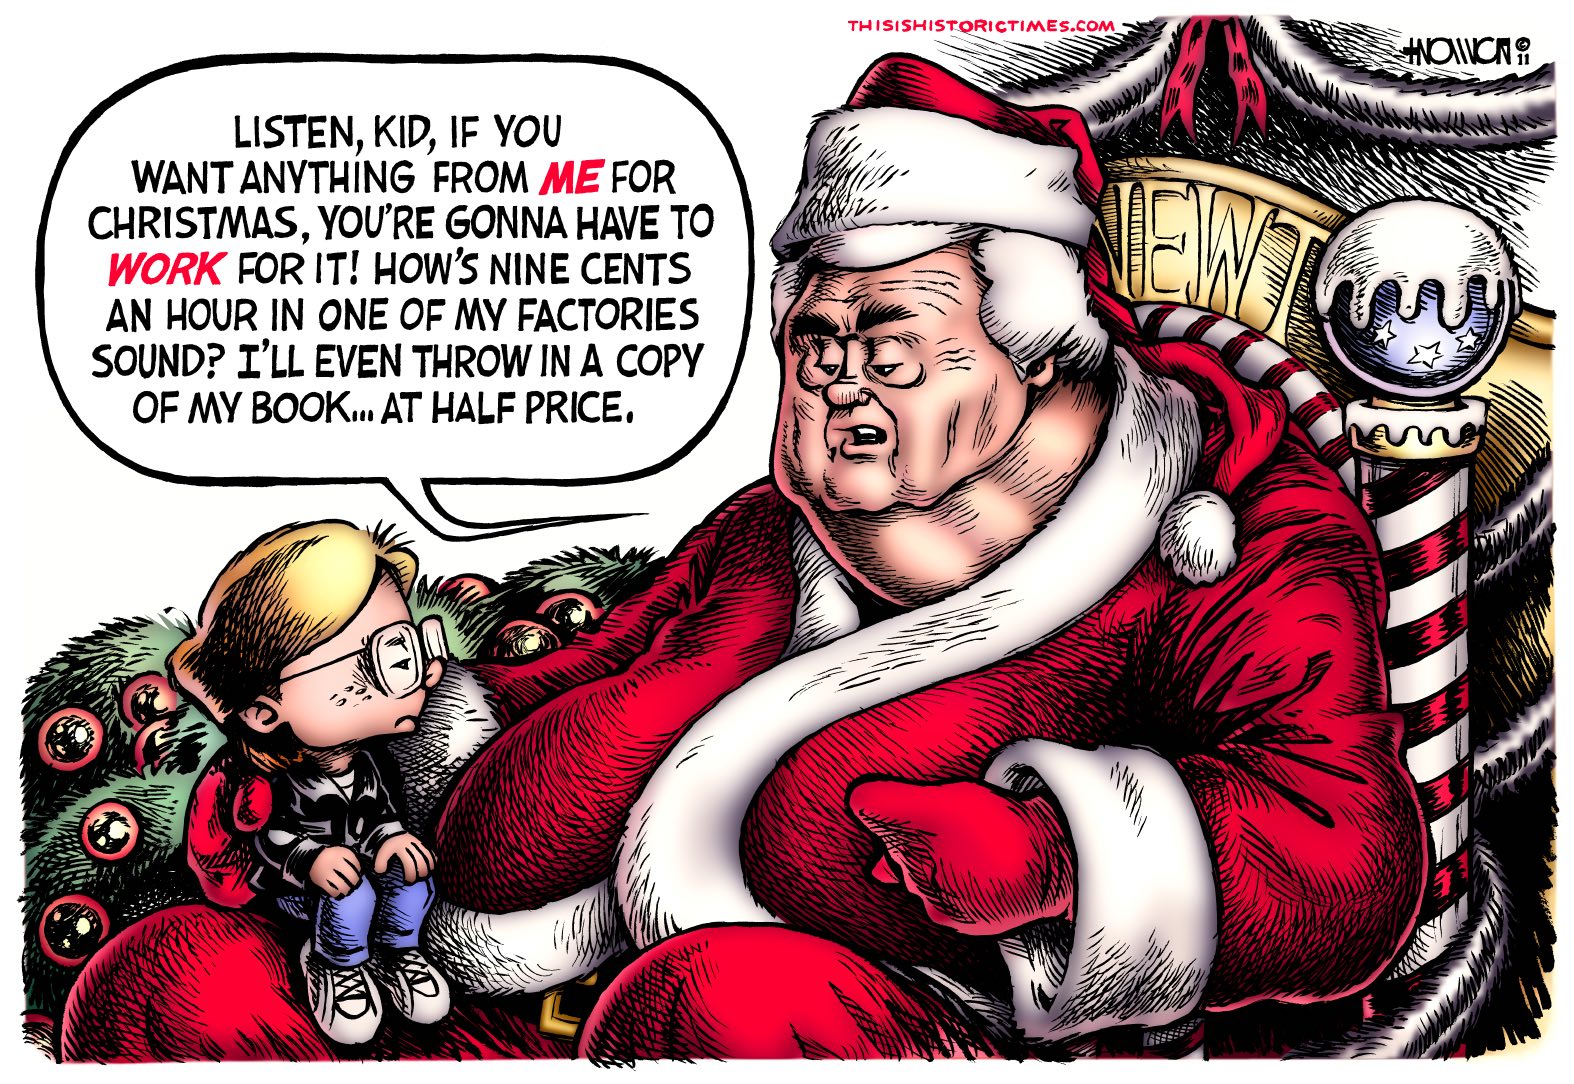 How the Gingrich Stole Christmas!